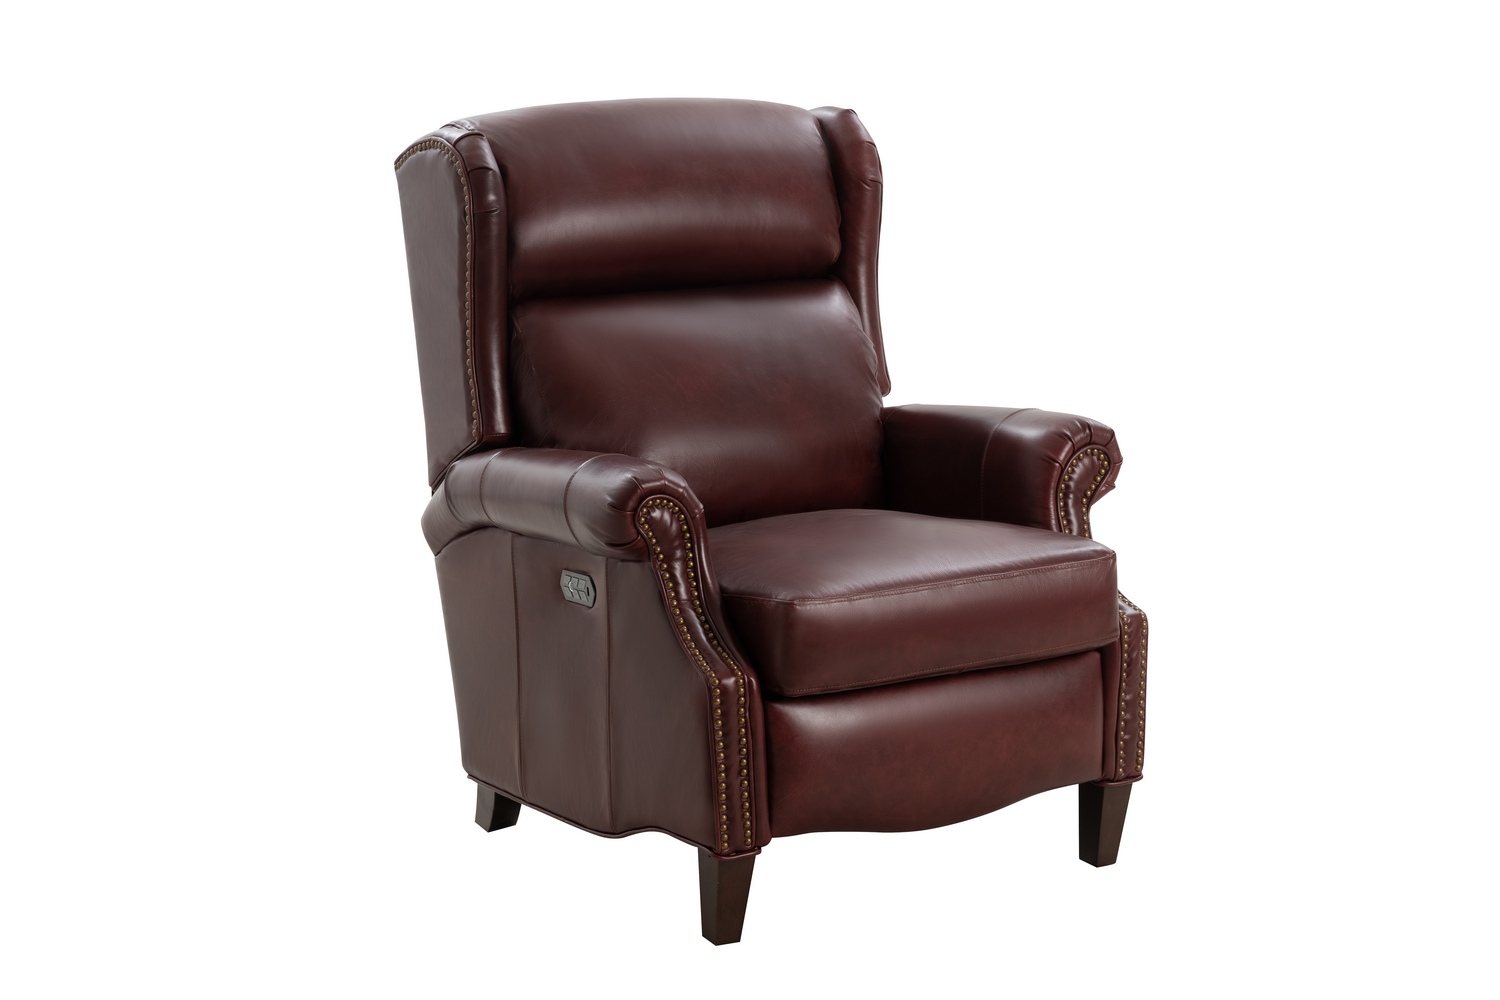 Barcalounger Philadelphia Power Recliner Chair with Power Head Rest and Lumbar - Emerson Sangria/Top Grain Leather